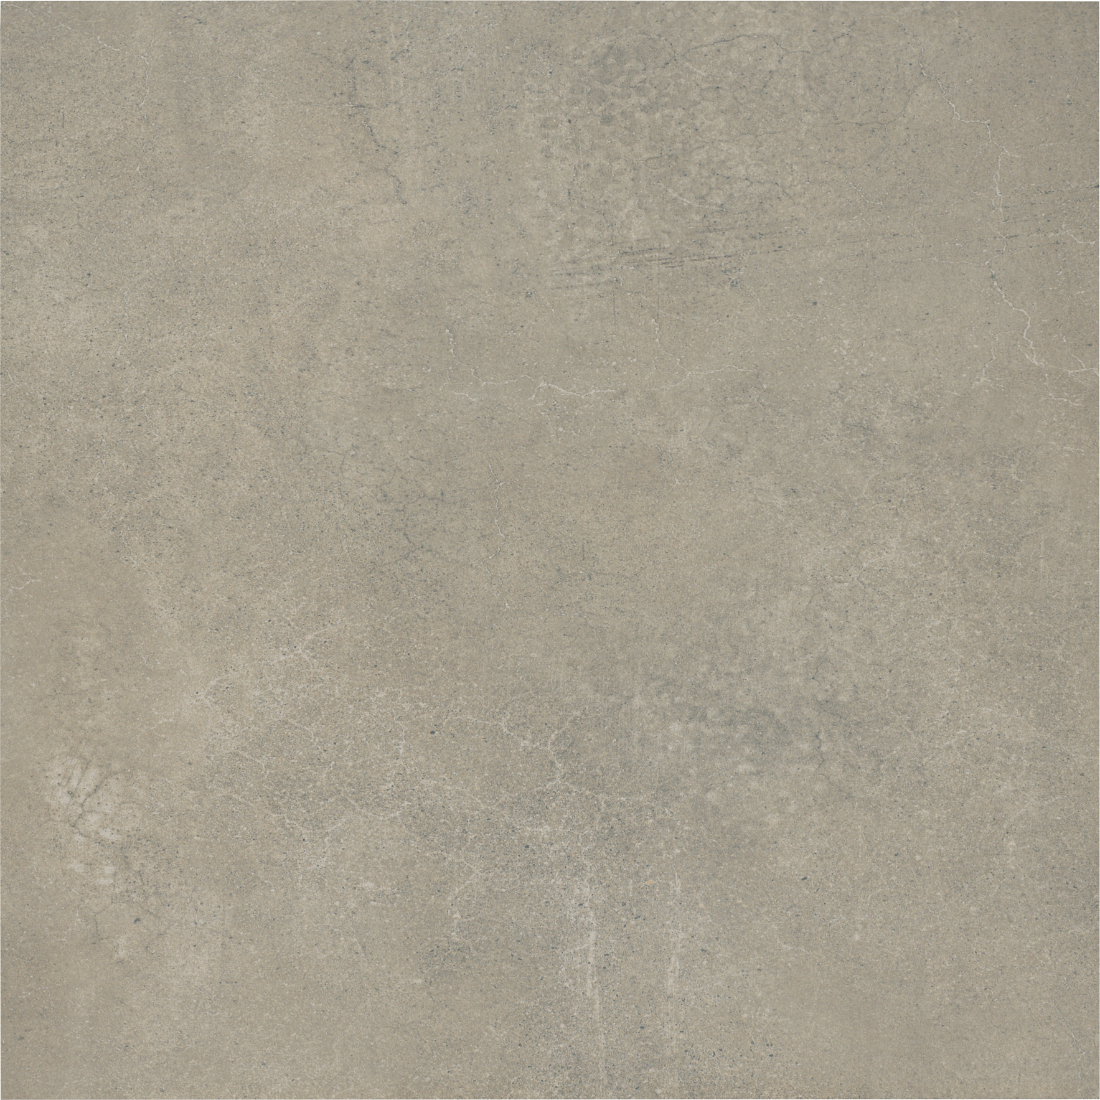 Urban Grey Porcelain Wall and Floor Tile - 24 x 24 in.